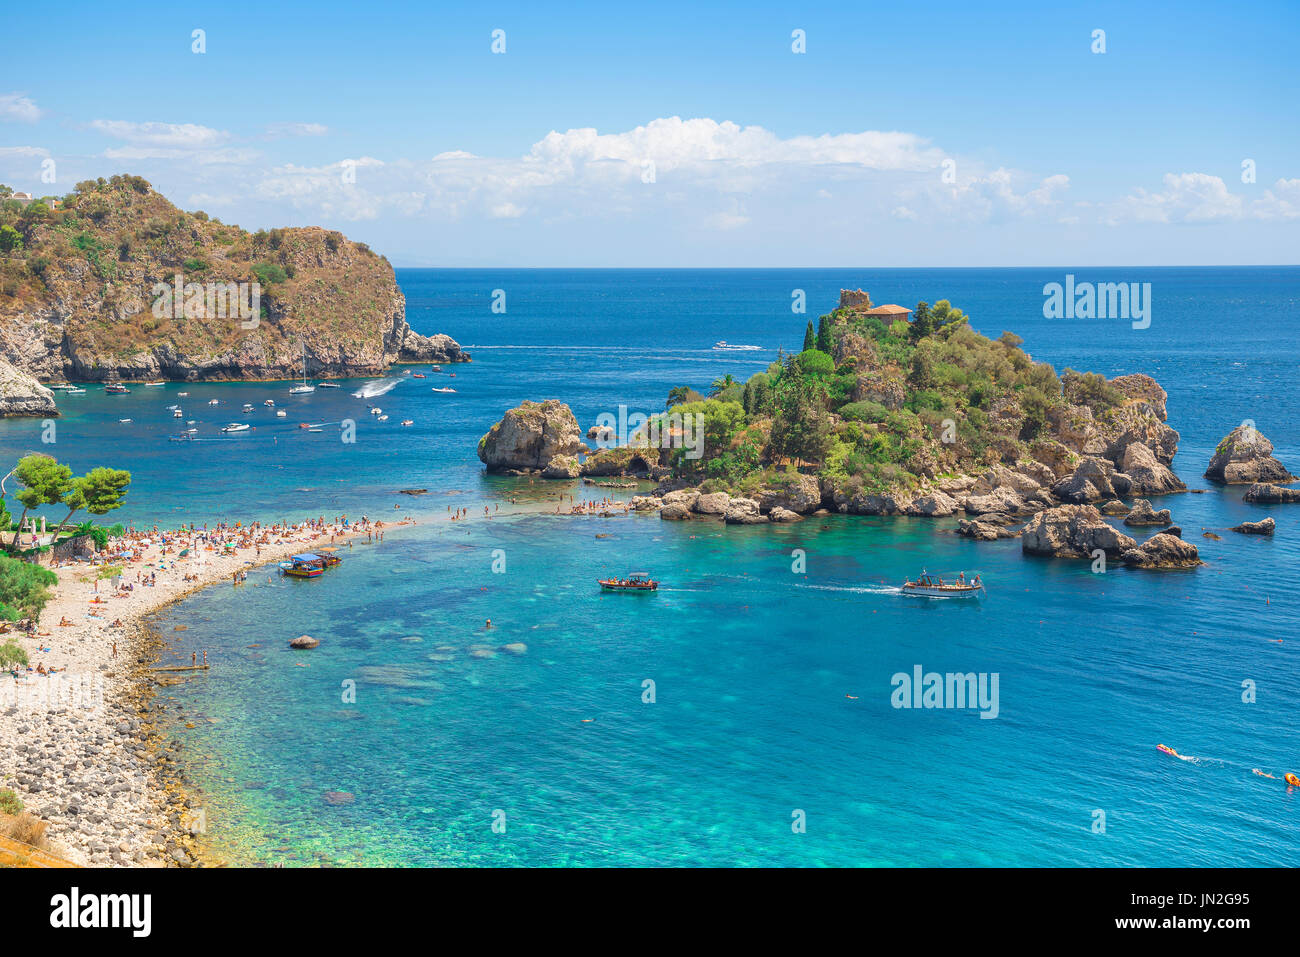 Sicily beach, view in summer of the secluded beach and small scenic island in Mazzaro, below Taormina, in Sicily coast, Europe Stock Photo